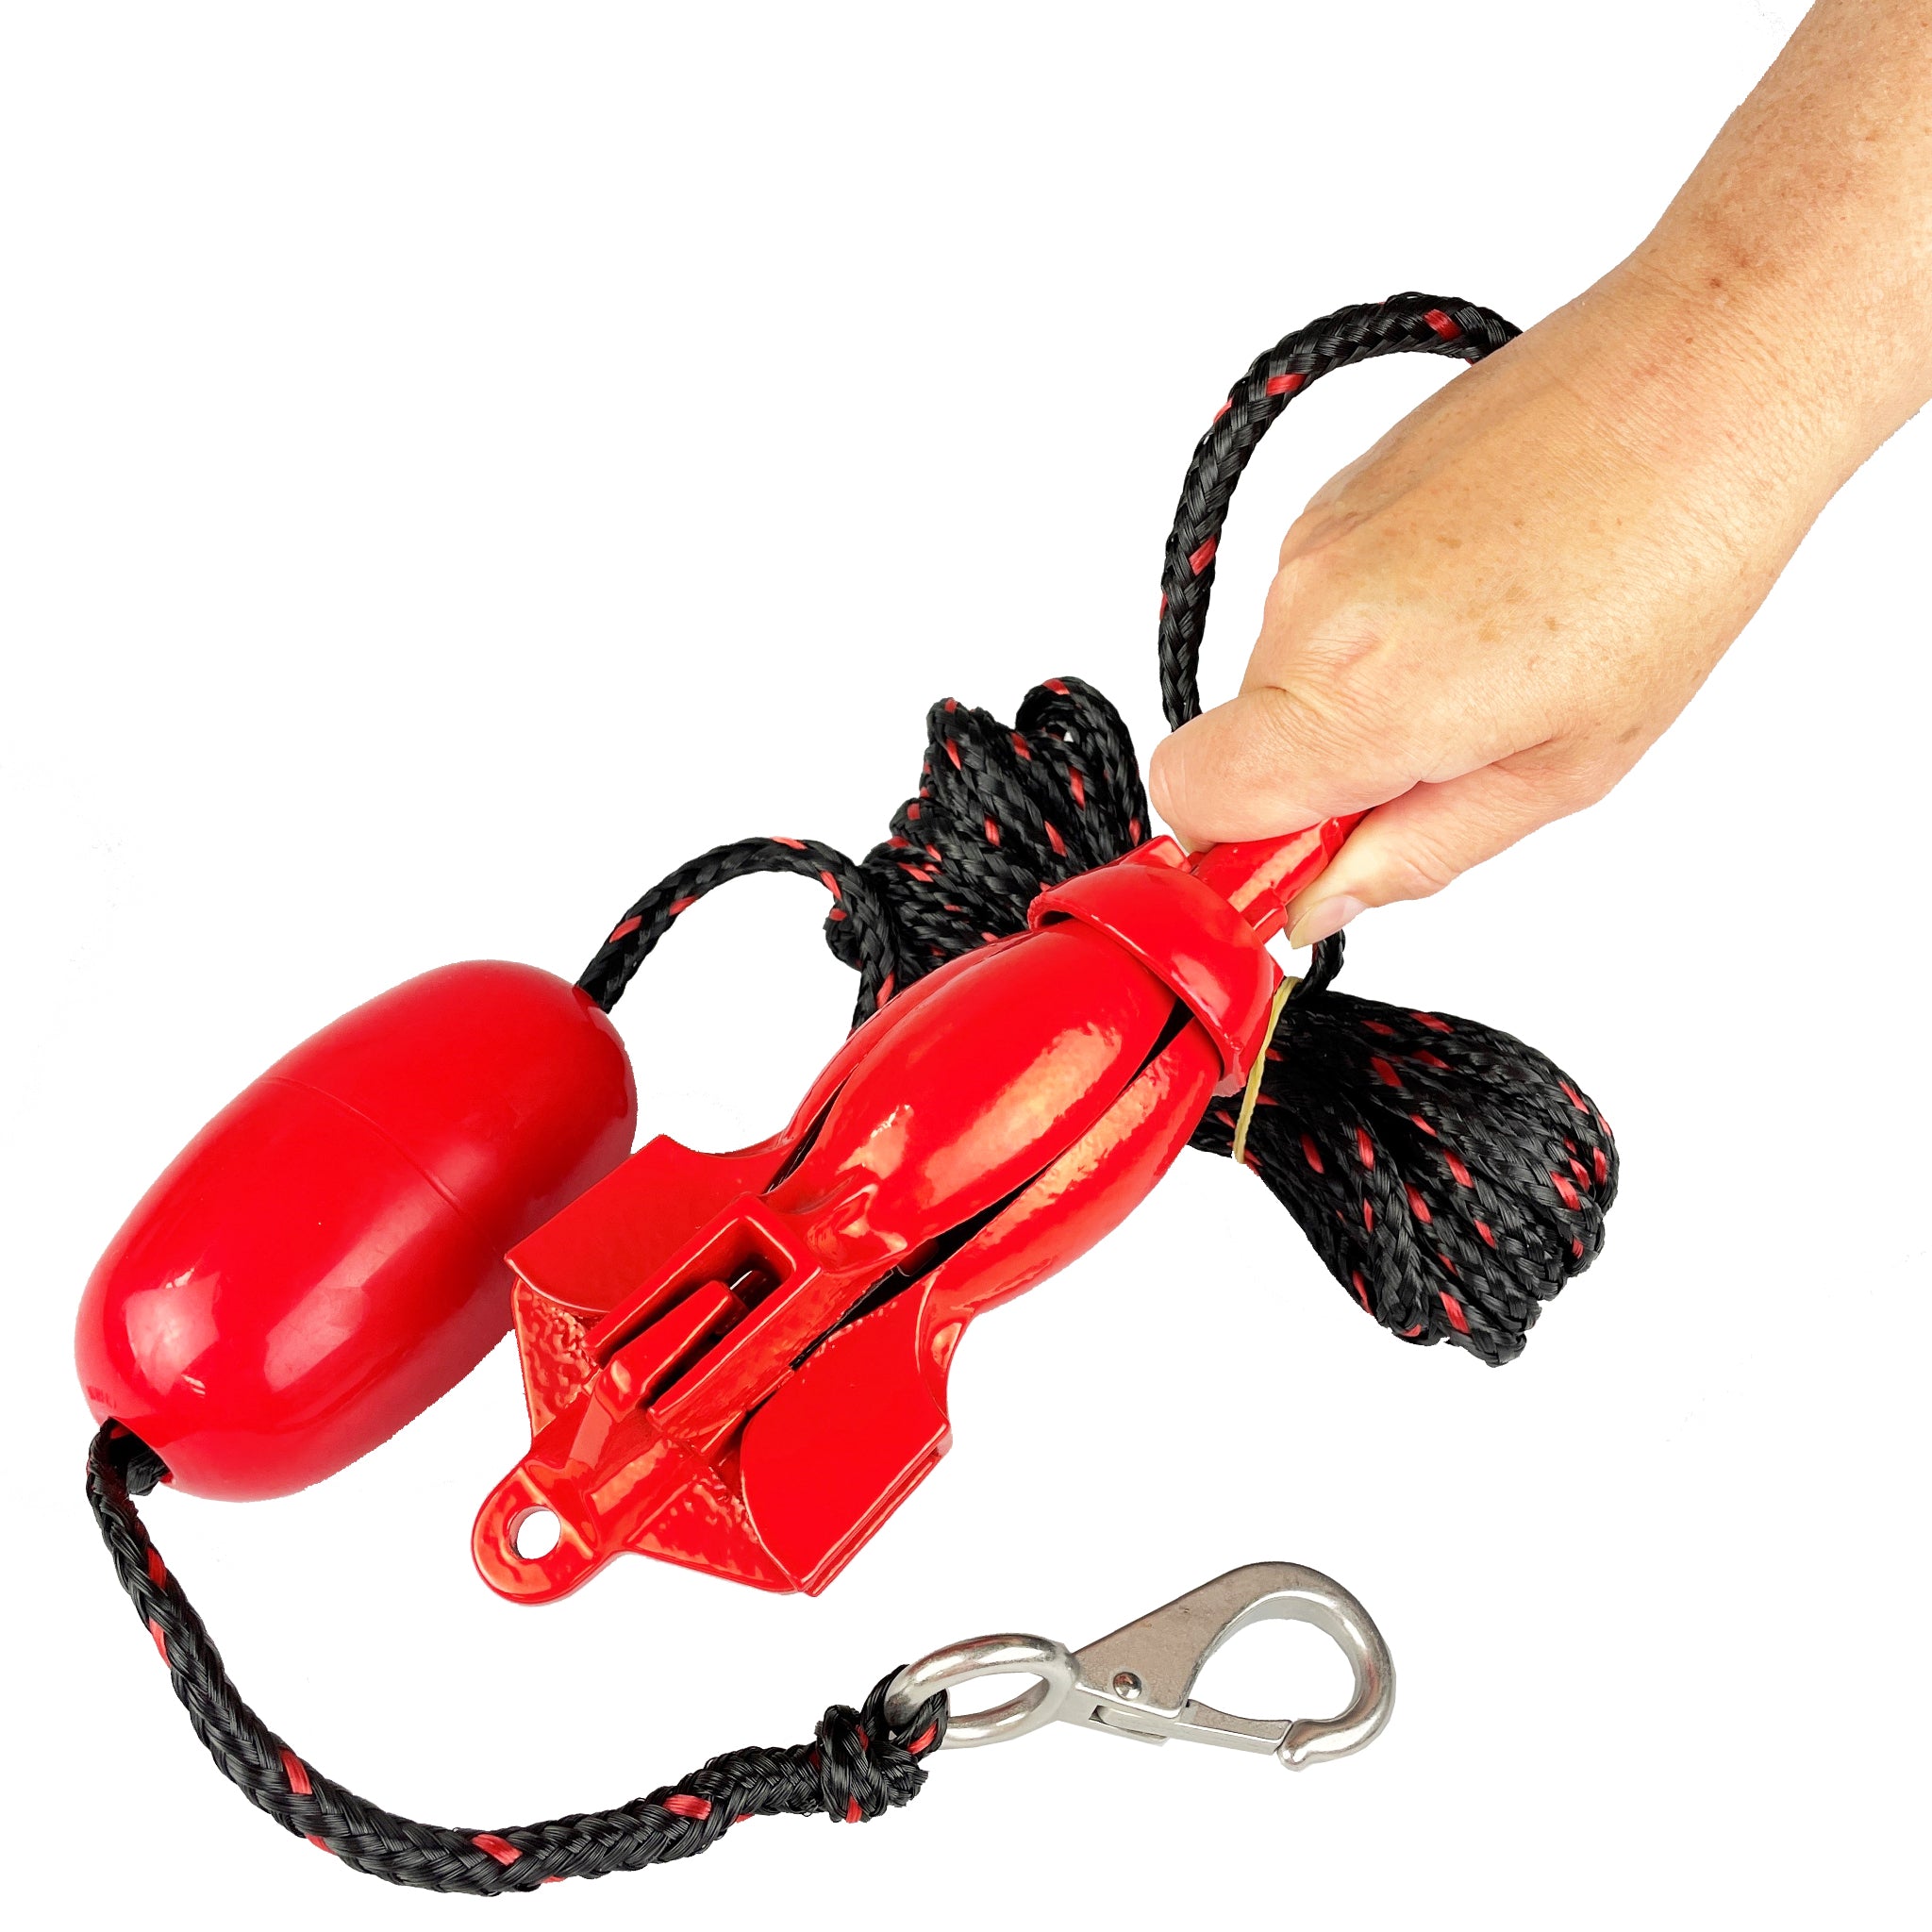 Cressi Squid Foldable Anchor Set for iSUP and Kayaks in hand